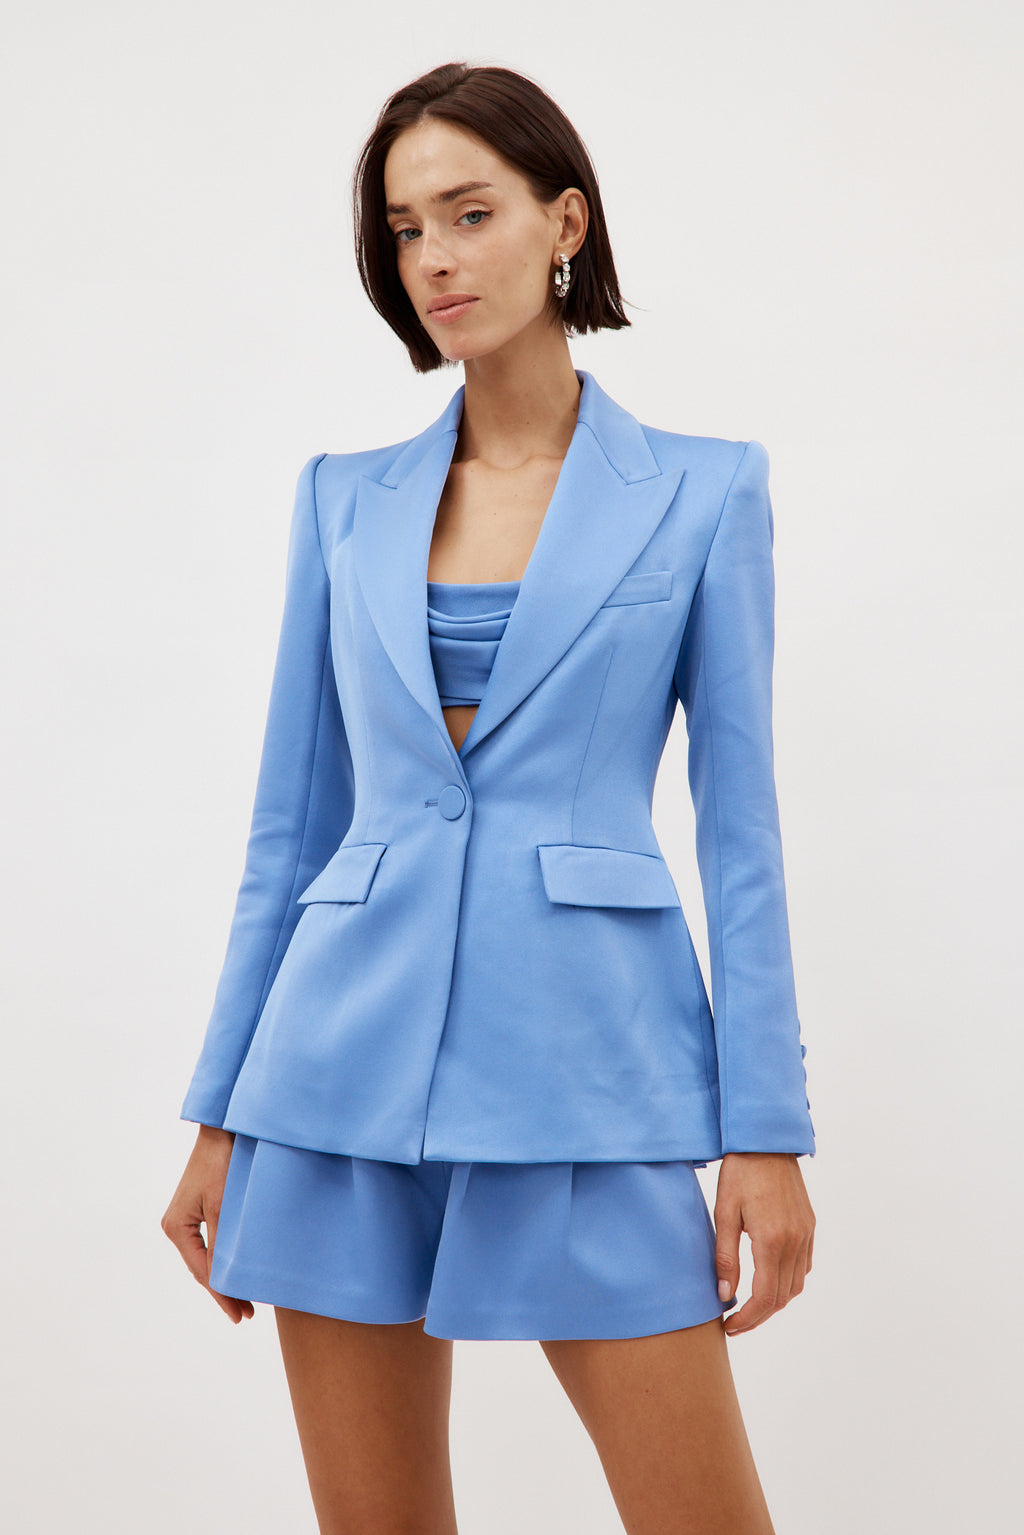 Satin Crepe Fitted Periwinkle Blazer